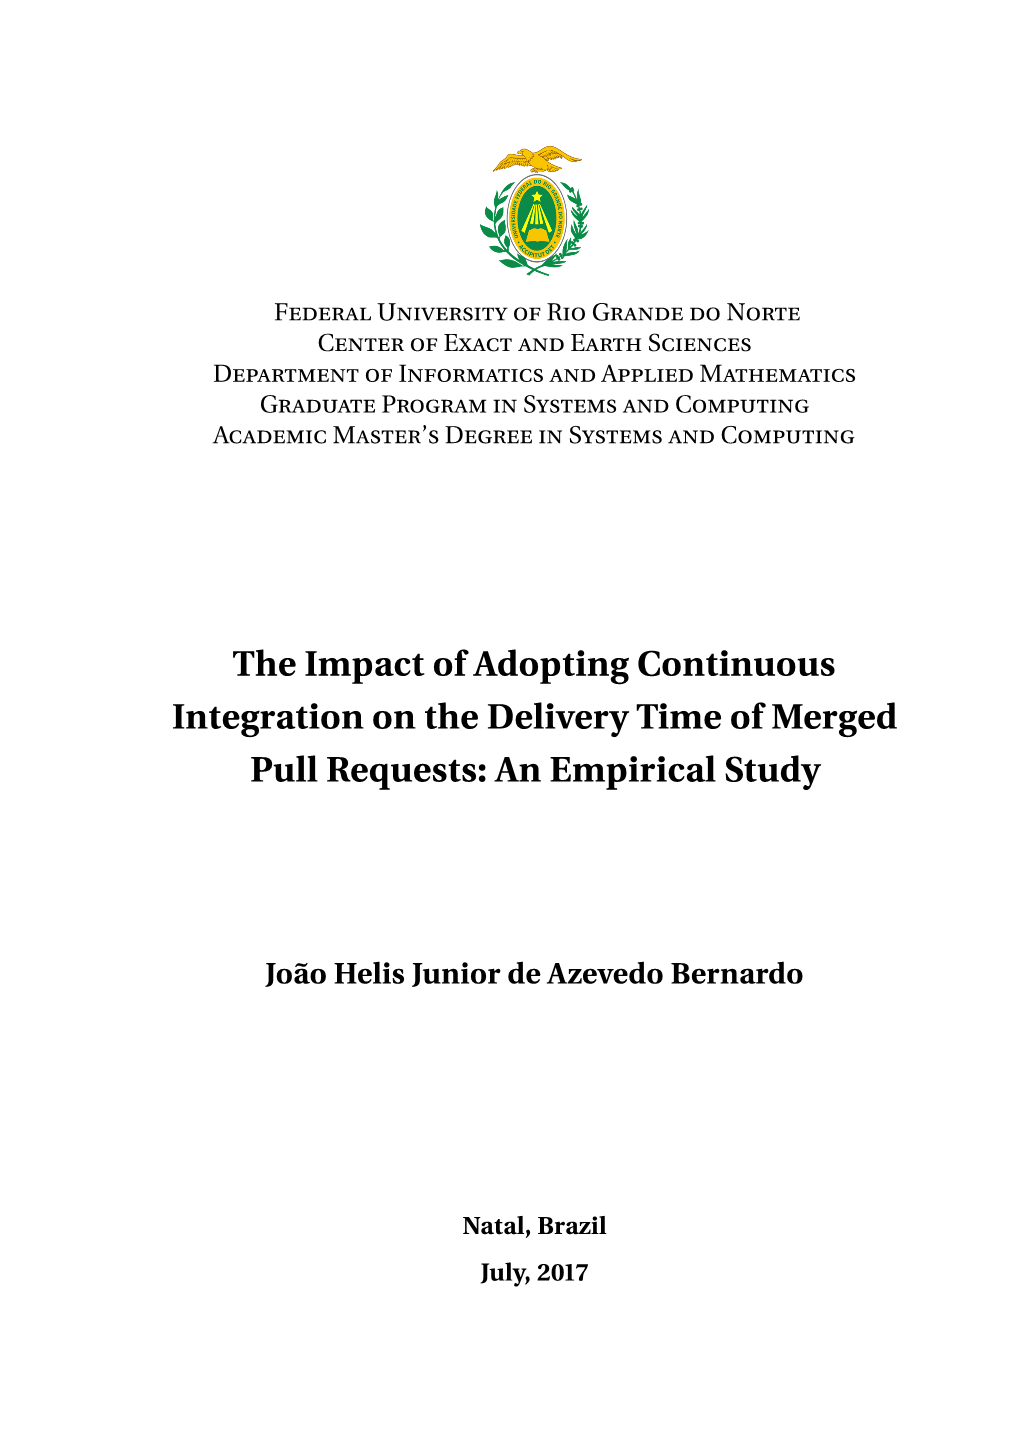 The Impact of Adopting Continuous Integration on the Delivery Time of Merged Pull Requests: an Empirical Study